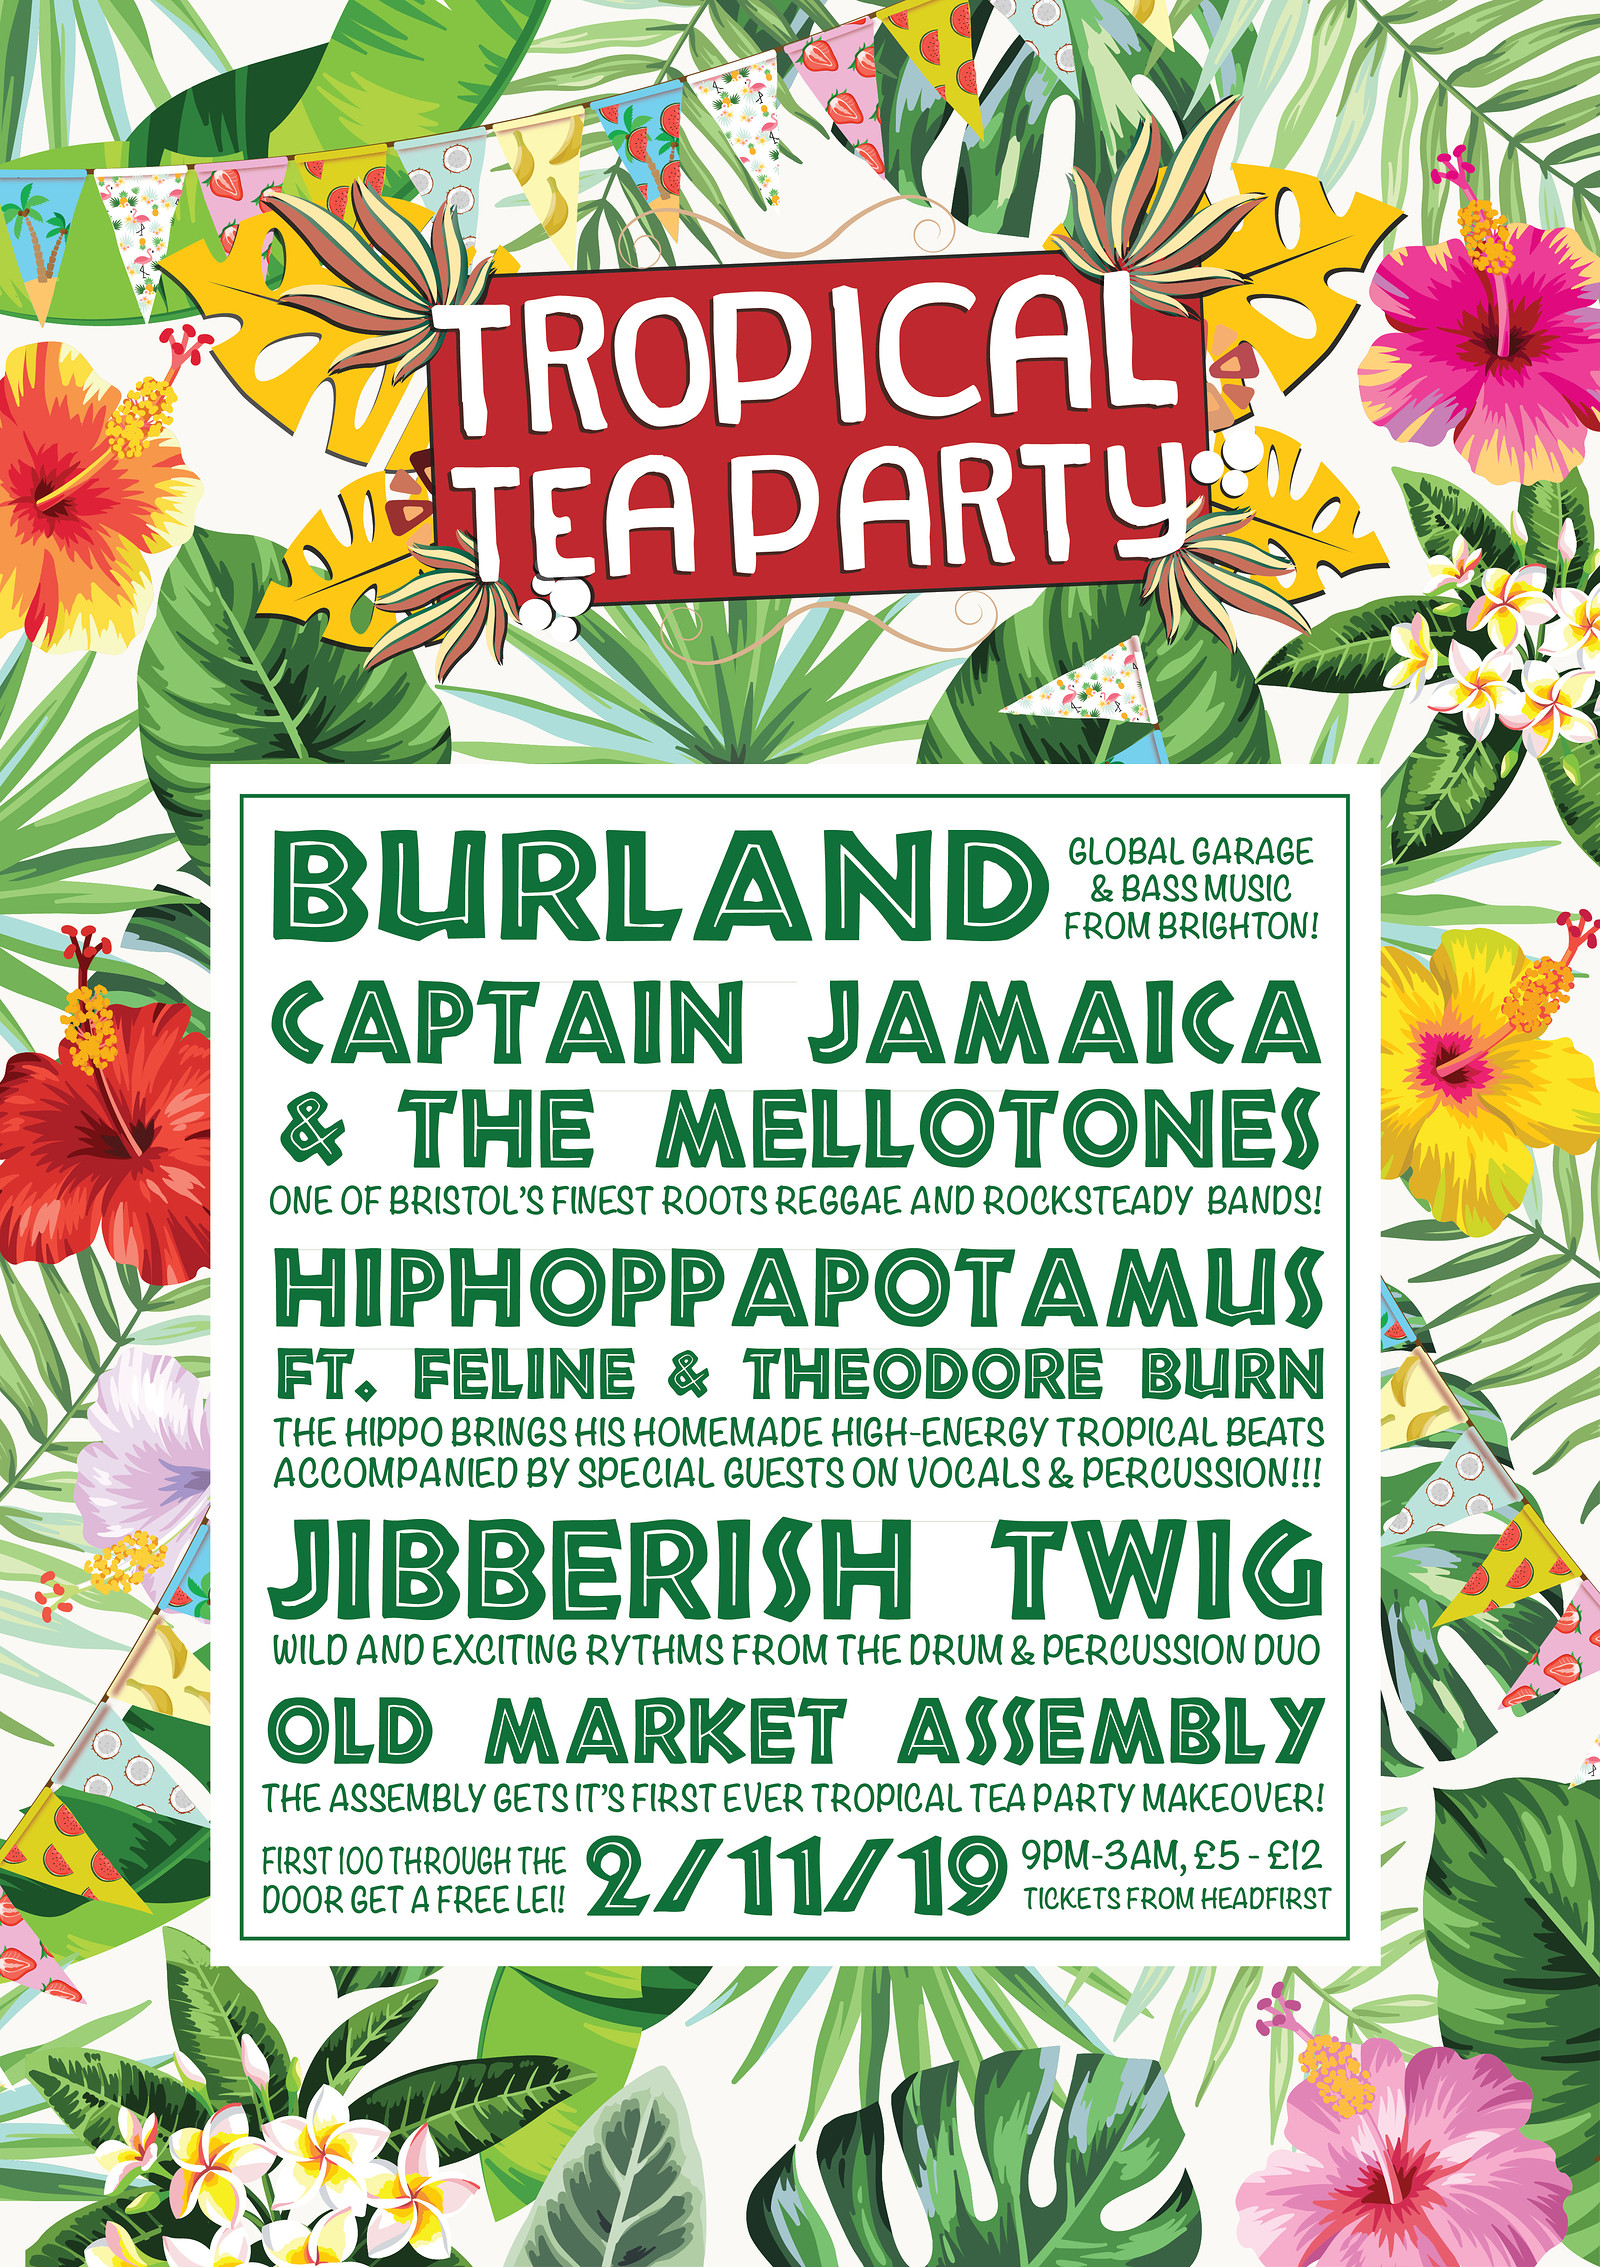 Tropical Tea Party Ft. Jibberish Twig, Hippo & .. at The Old Market Assembly